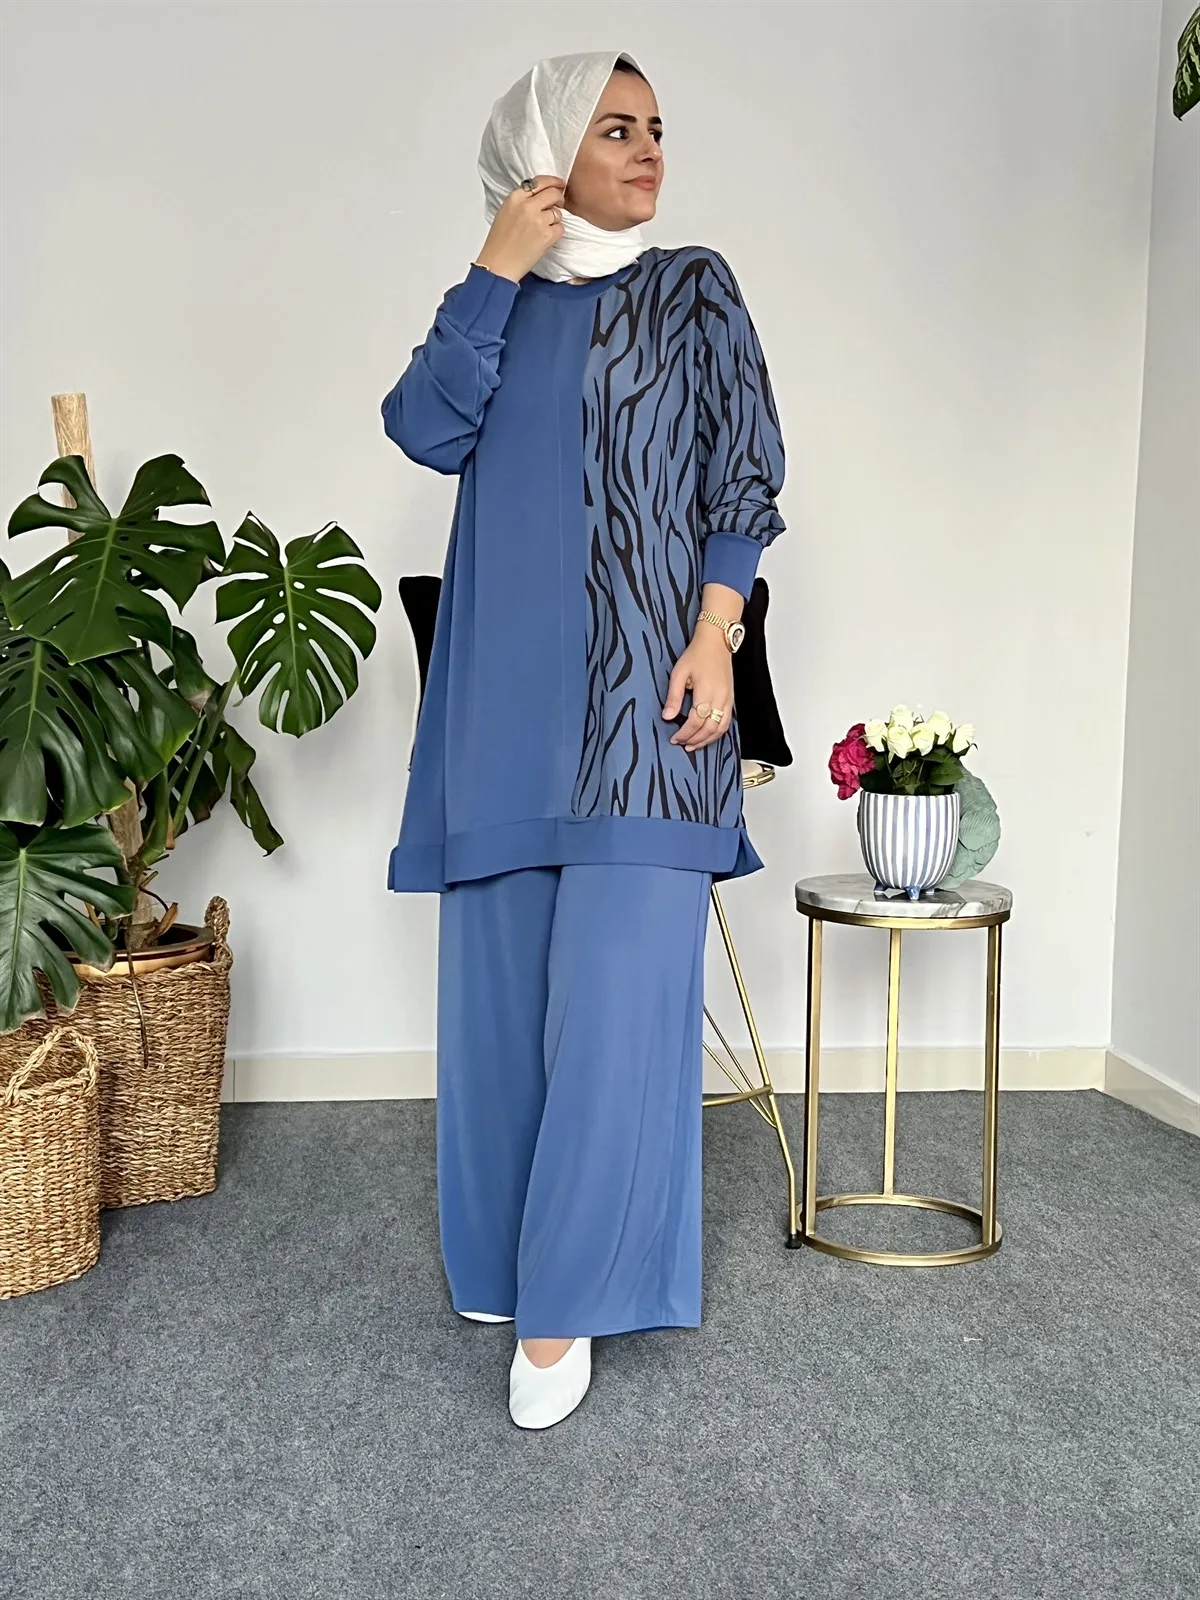 

Women's twinset seasonal and summer tunic and trousers hijab suit women's bottom and top pattern stylish and elegant temporary shed fashion